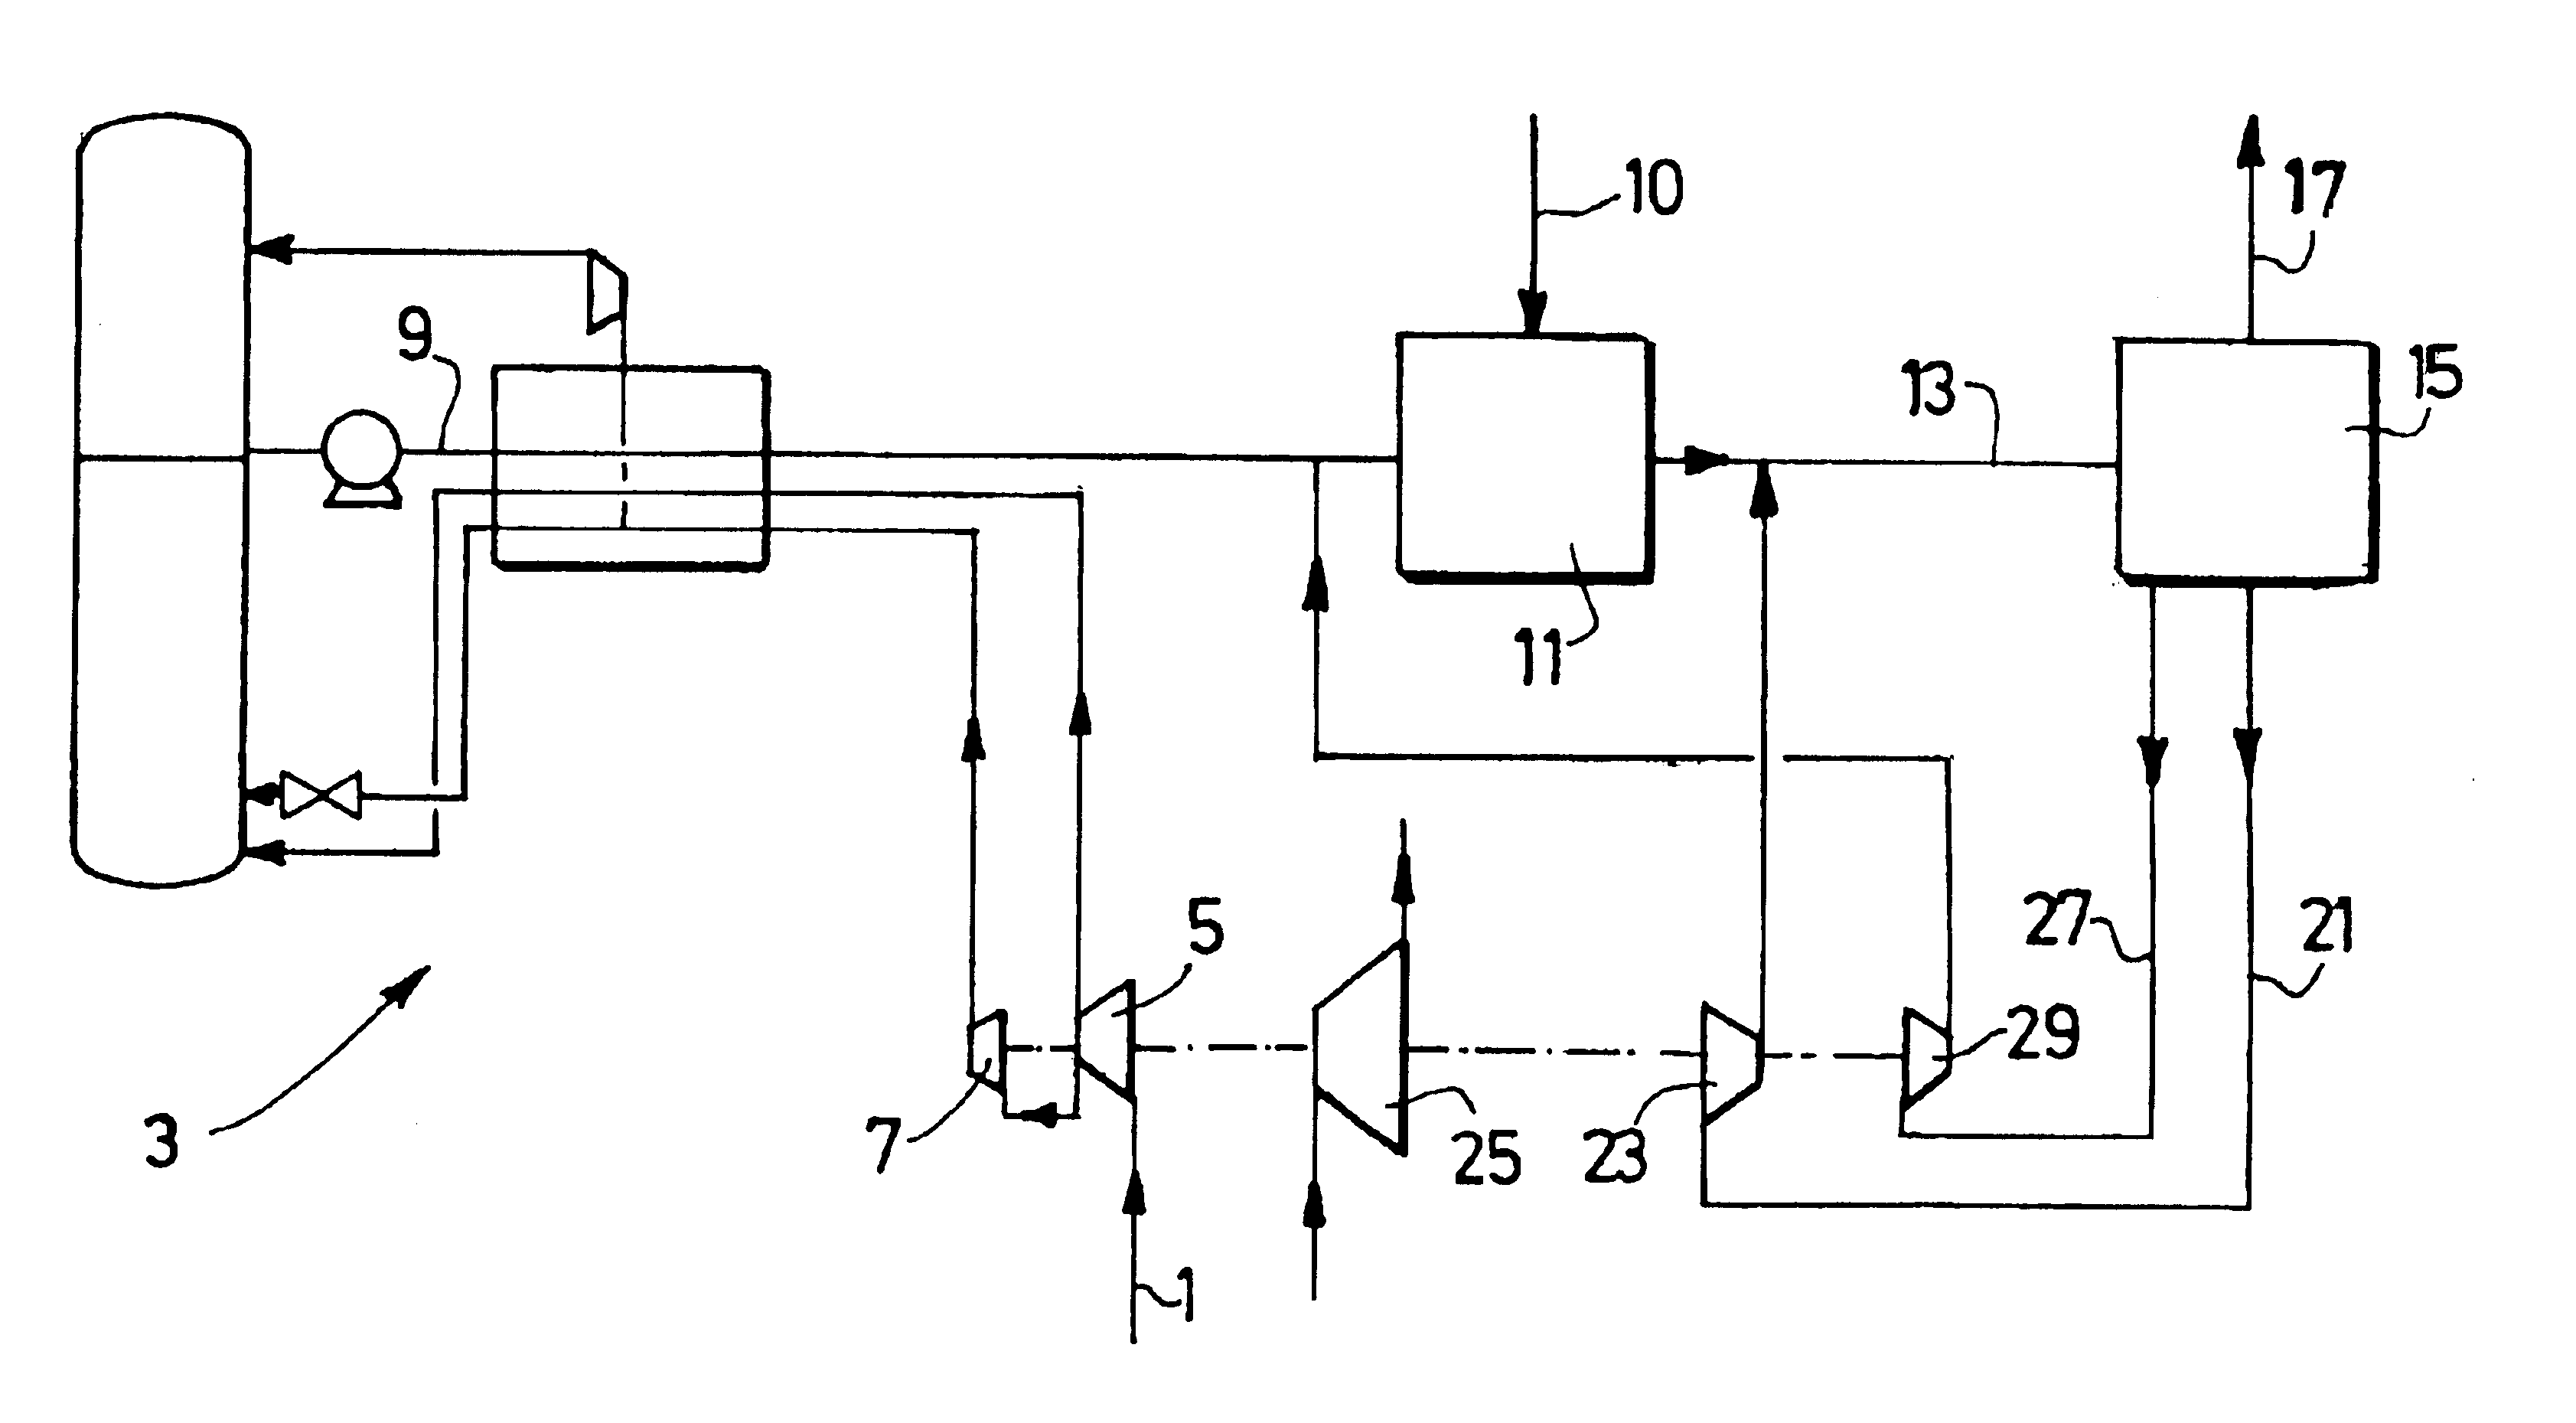 Process and apparatus for the production of methanol